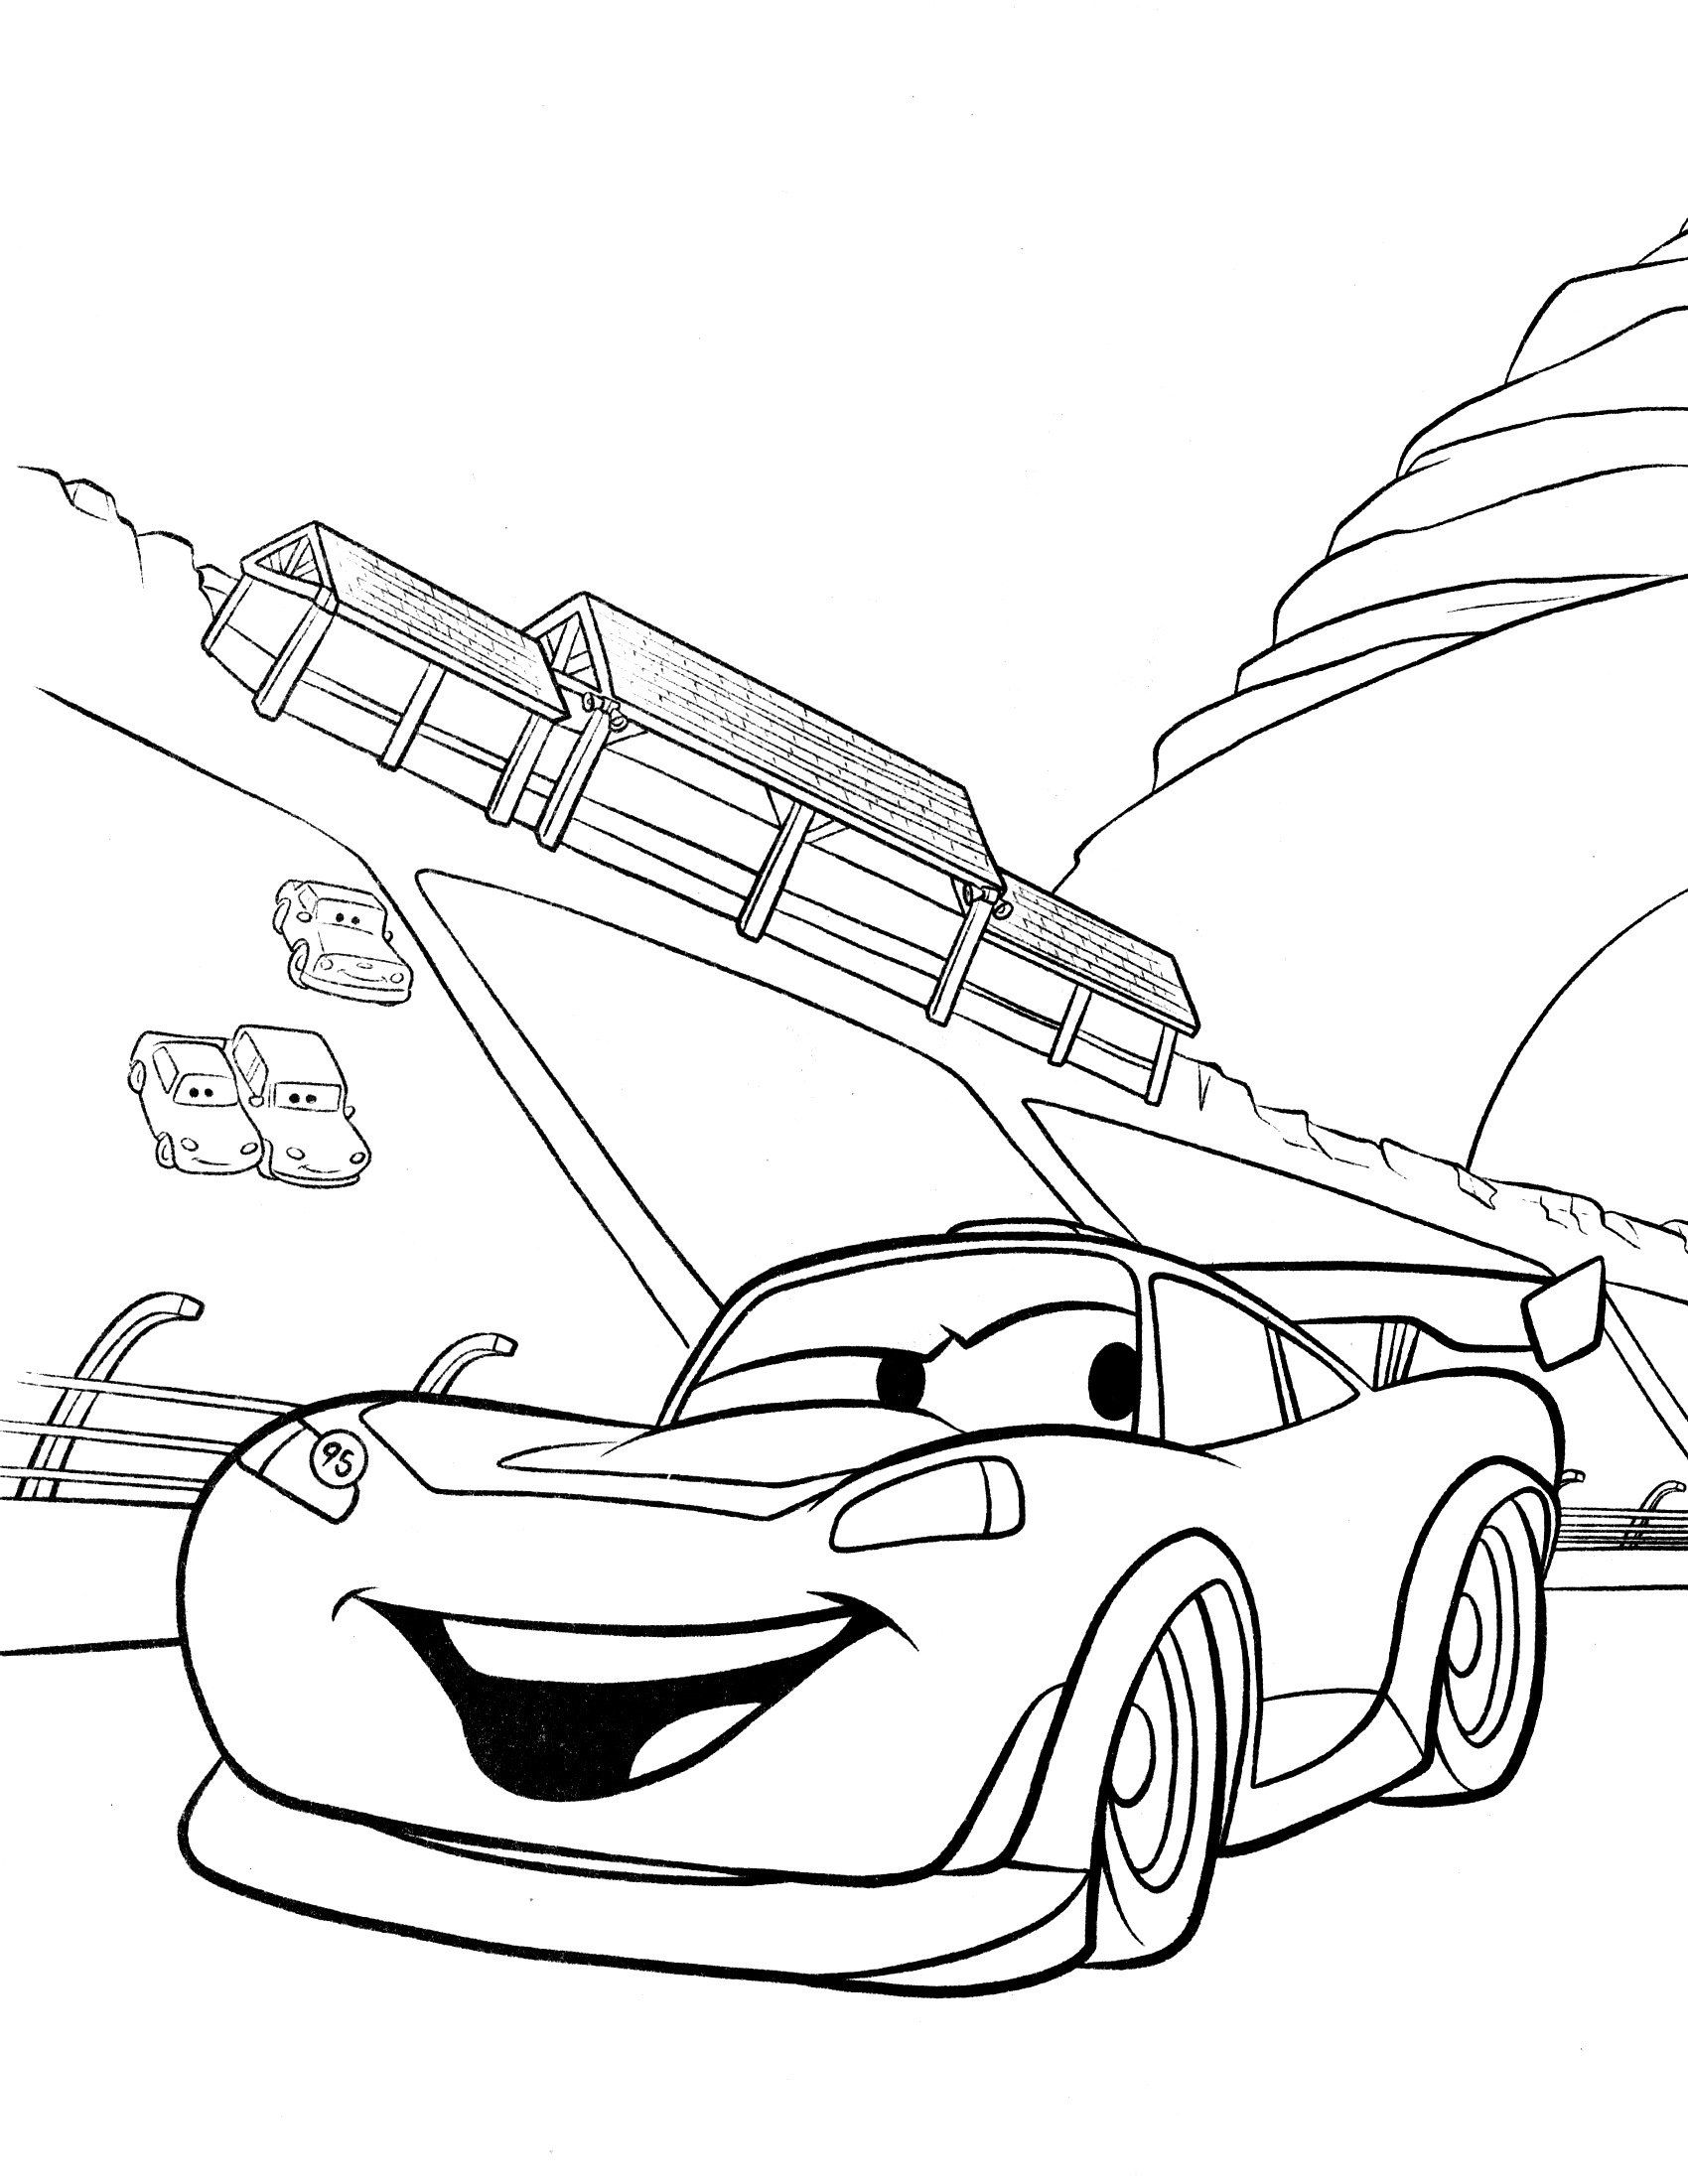 Car Coloring Pages At GetColorings Free Printable Colorings Pages To Print And Color